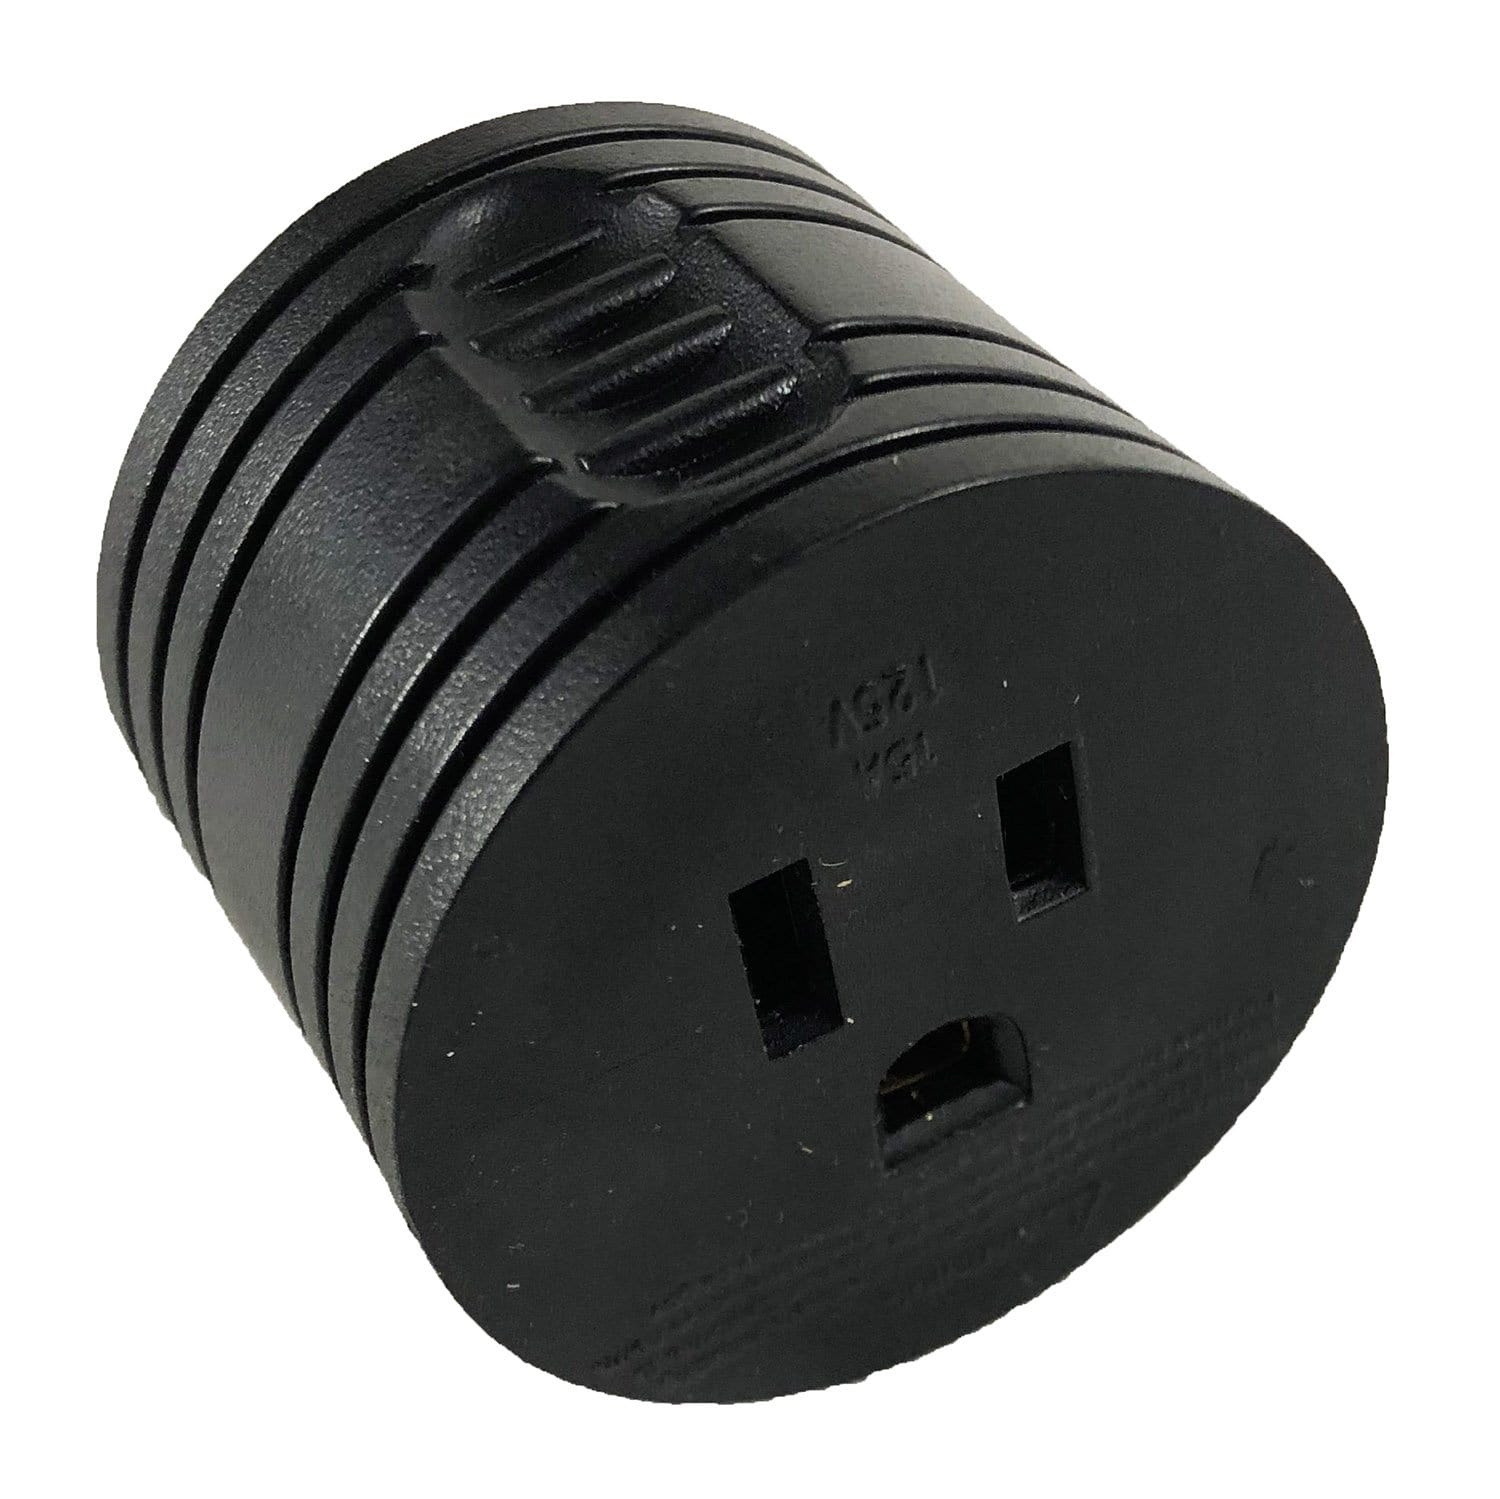 Voltec 16-00501 15A Female - 30A Male Park Adapter, Round